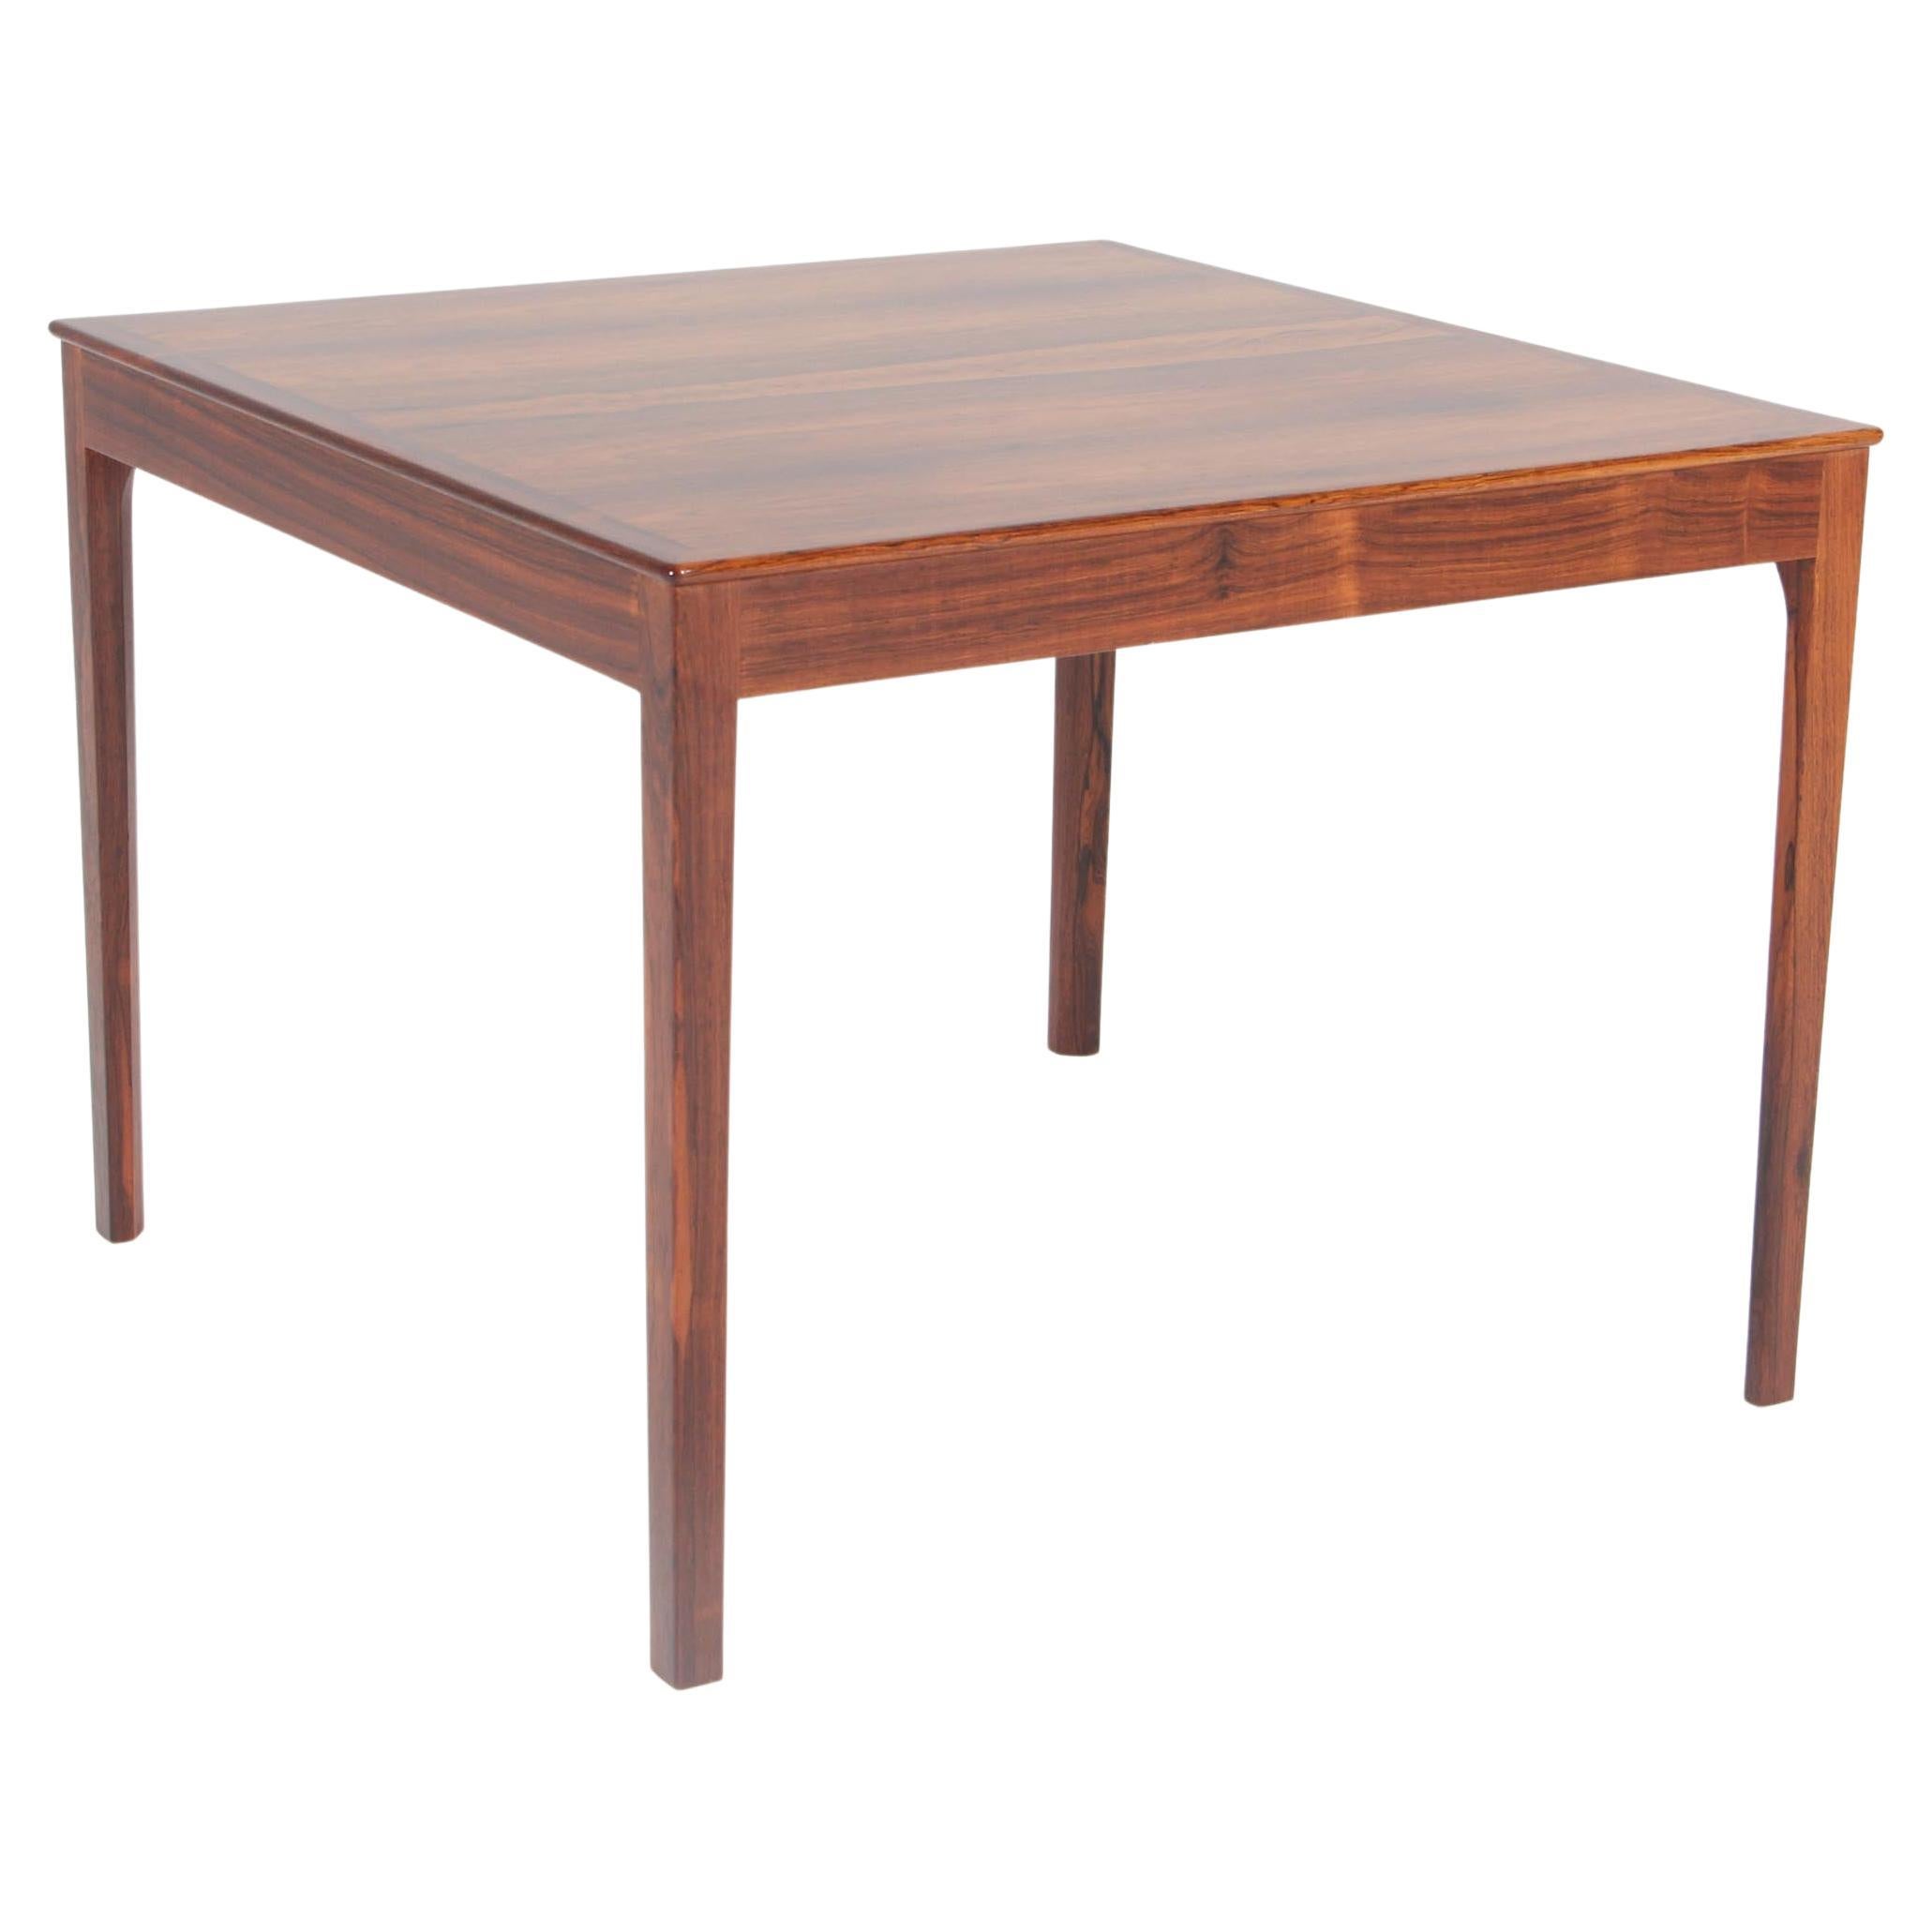 Ole Wanscher Coffee Table, Rosewood, A. J. Iversen